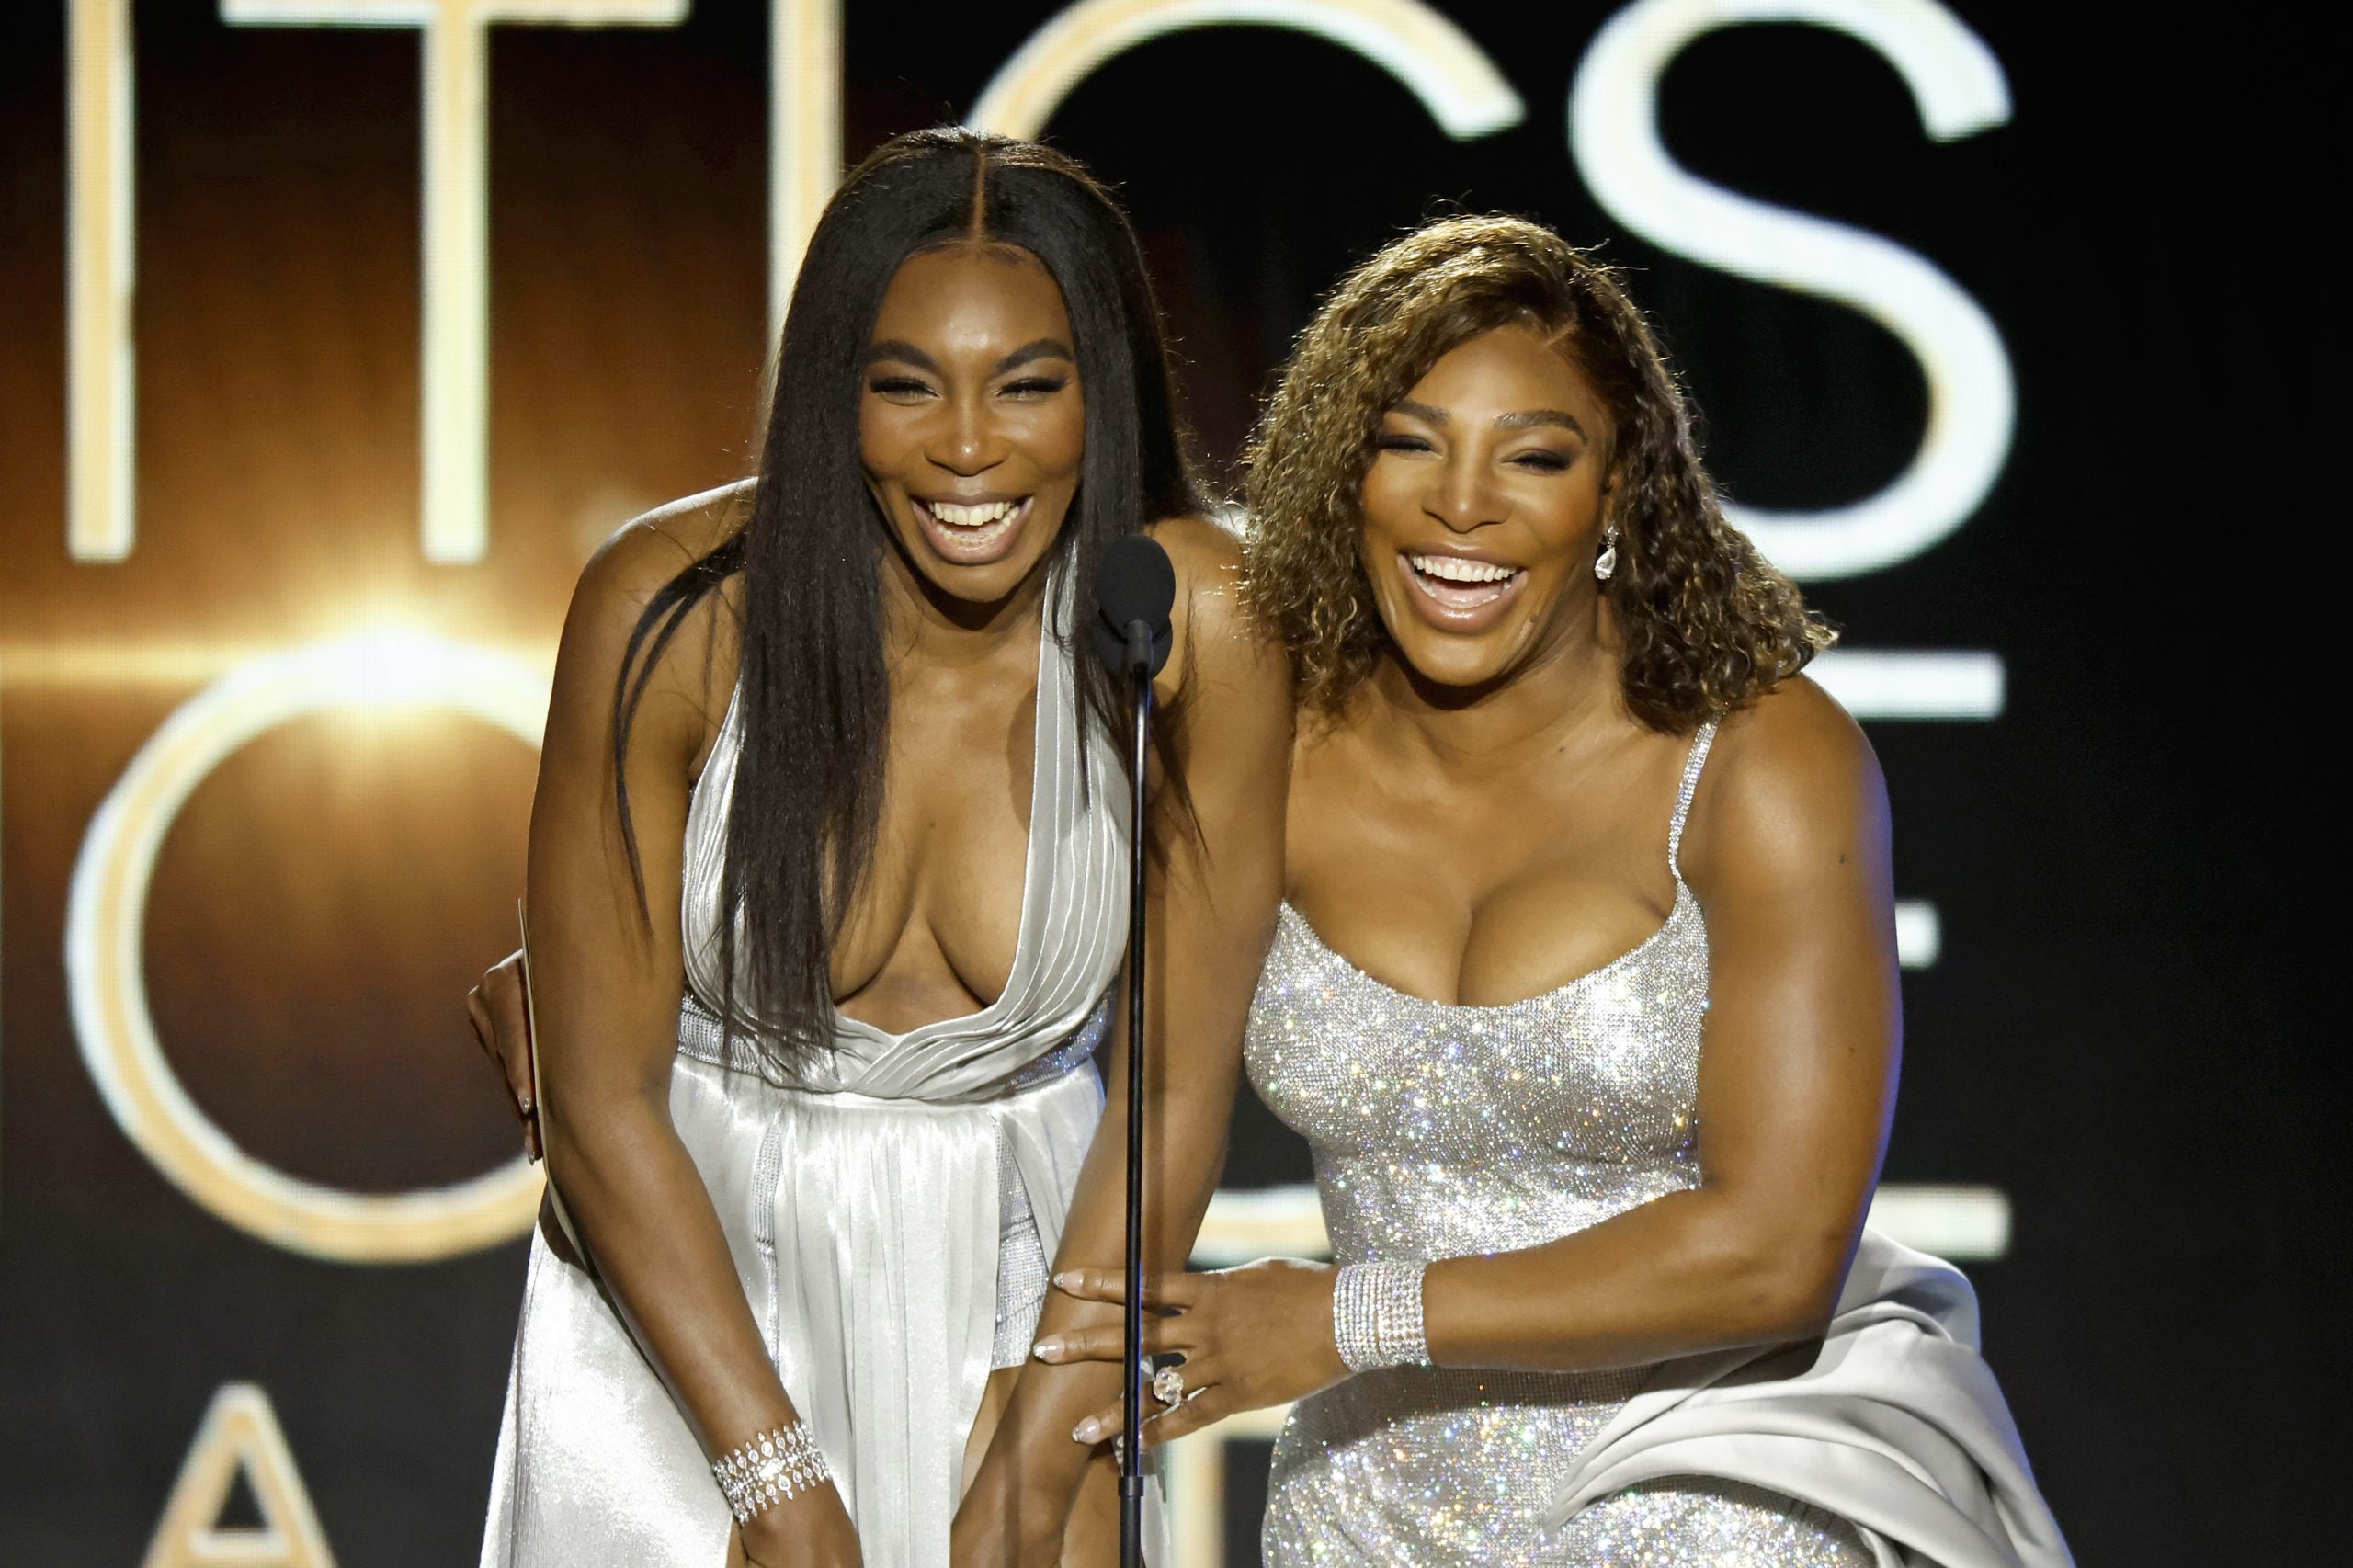 Director Apologizes For Diminishing Venus & Serena Williams During Acceptance Speech